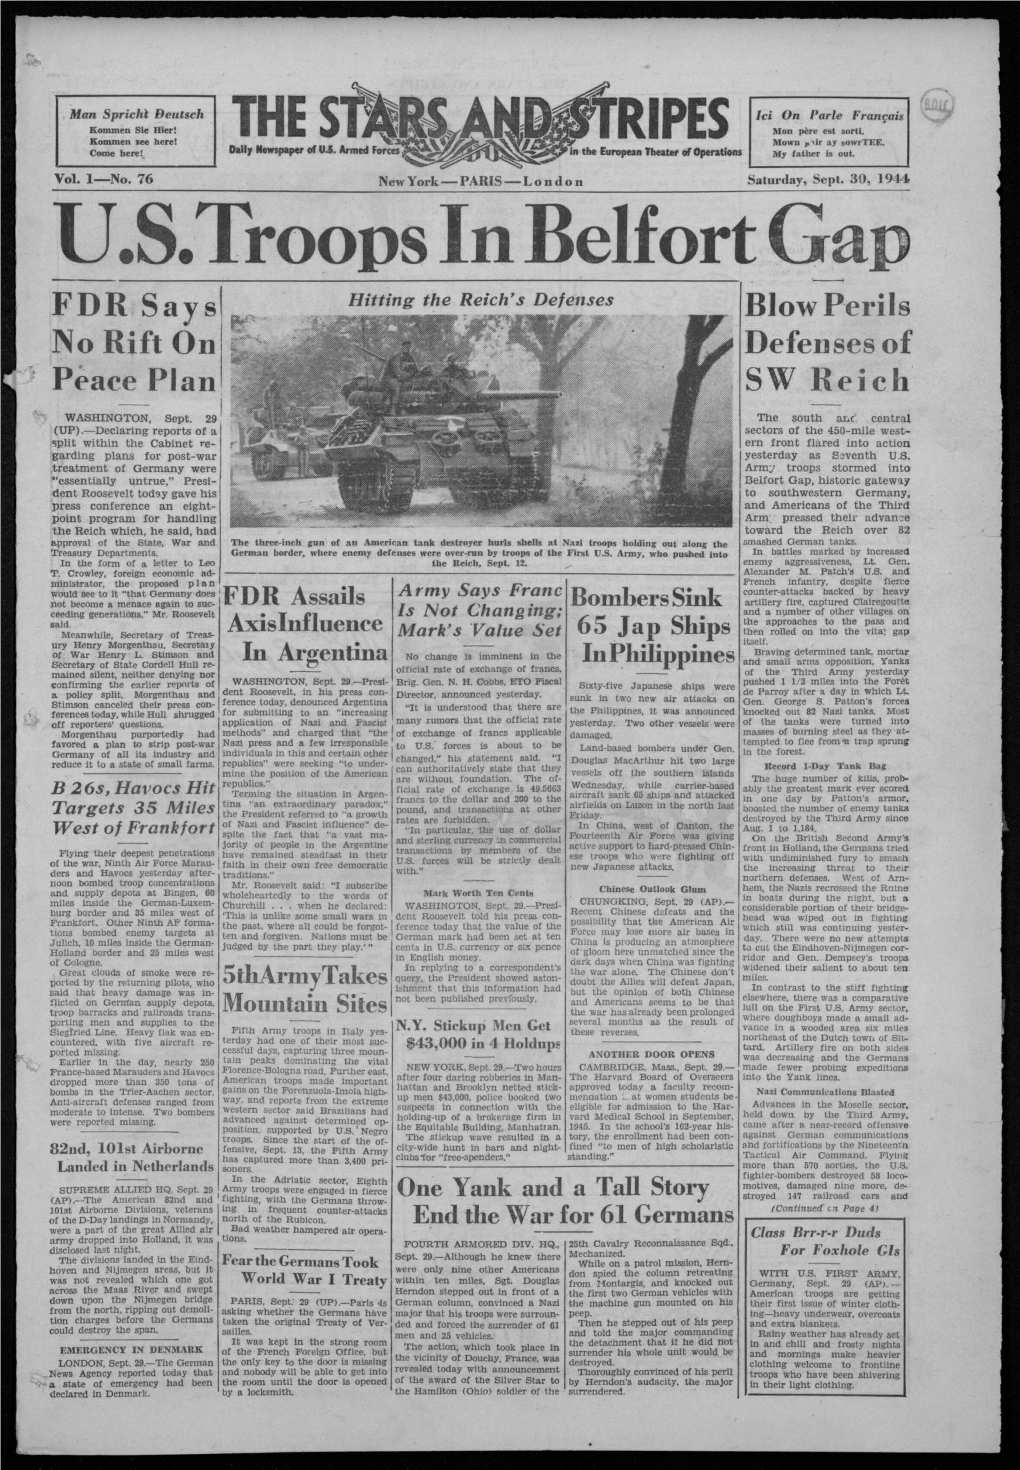 U.S.Troops in Belf Ort FDR Says Hitting the Reich's Defenses Blow Perils No Rift on Defenses of Peace Plan SW Reich